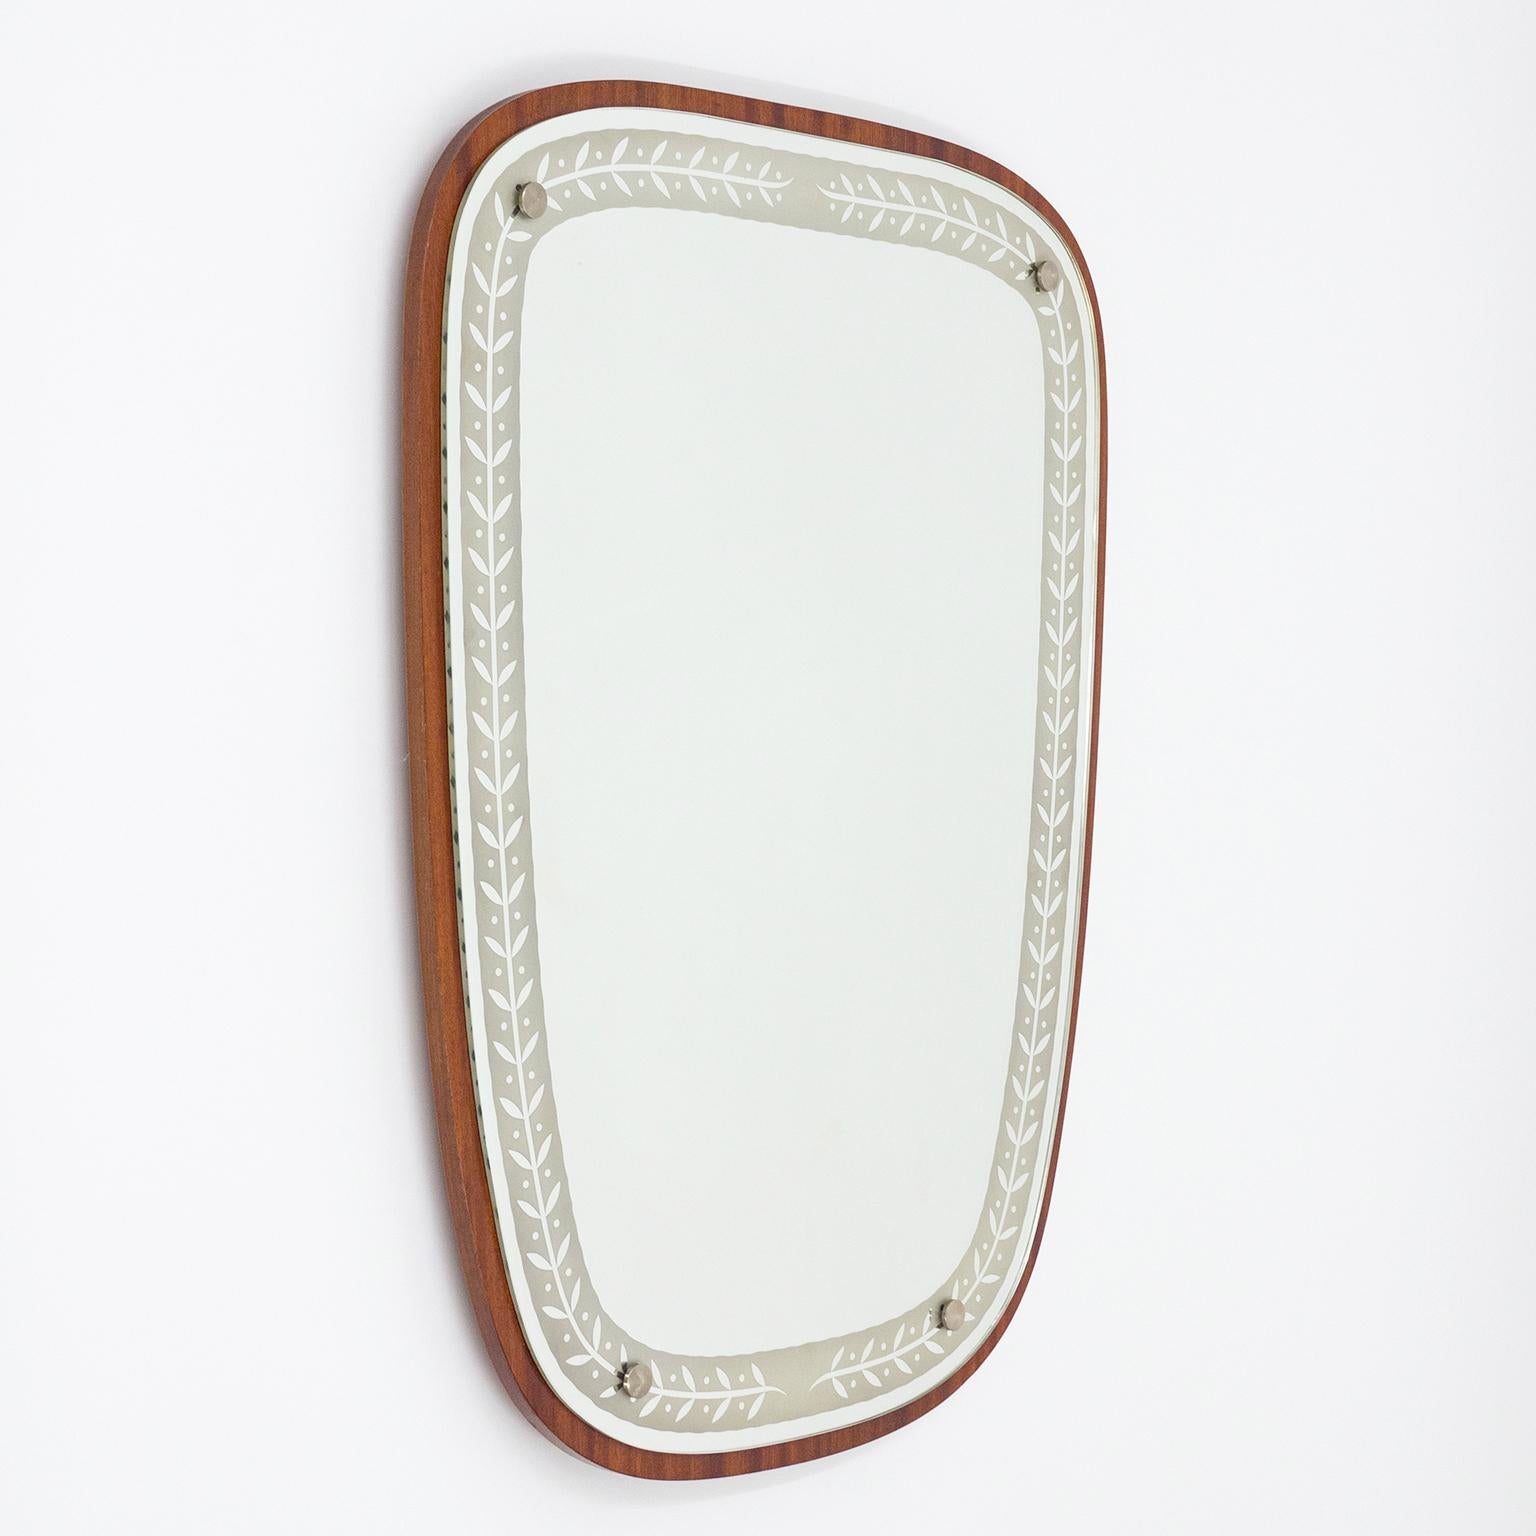 Lovely large Art Deco Mirror from Sweden, 1940s. A mahogany veneered backplate to which a mirror with etched border is attached with four nickeled knobs. Very good original condition with just minor ageing to the mirror.